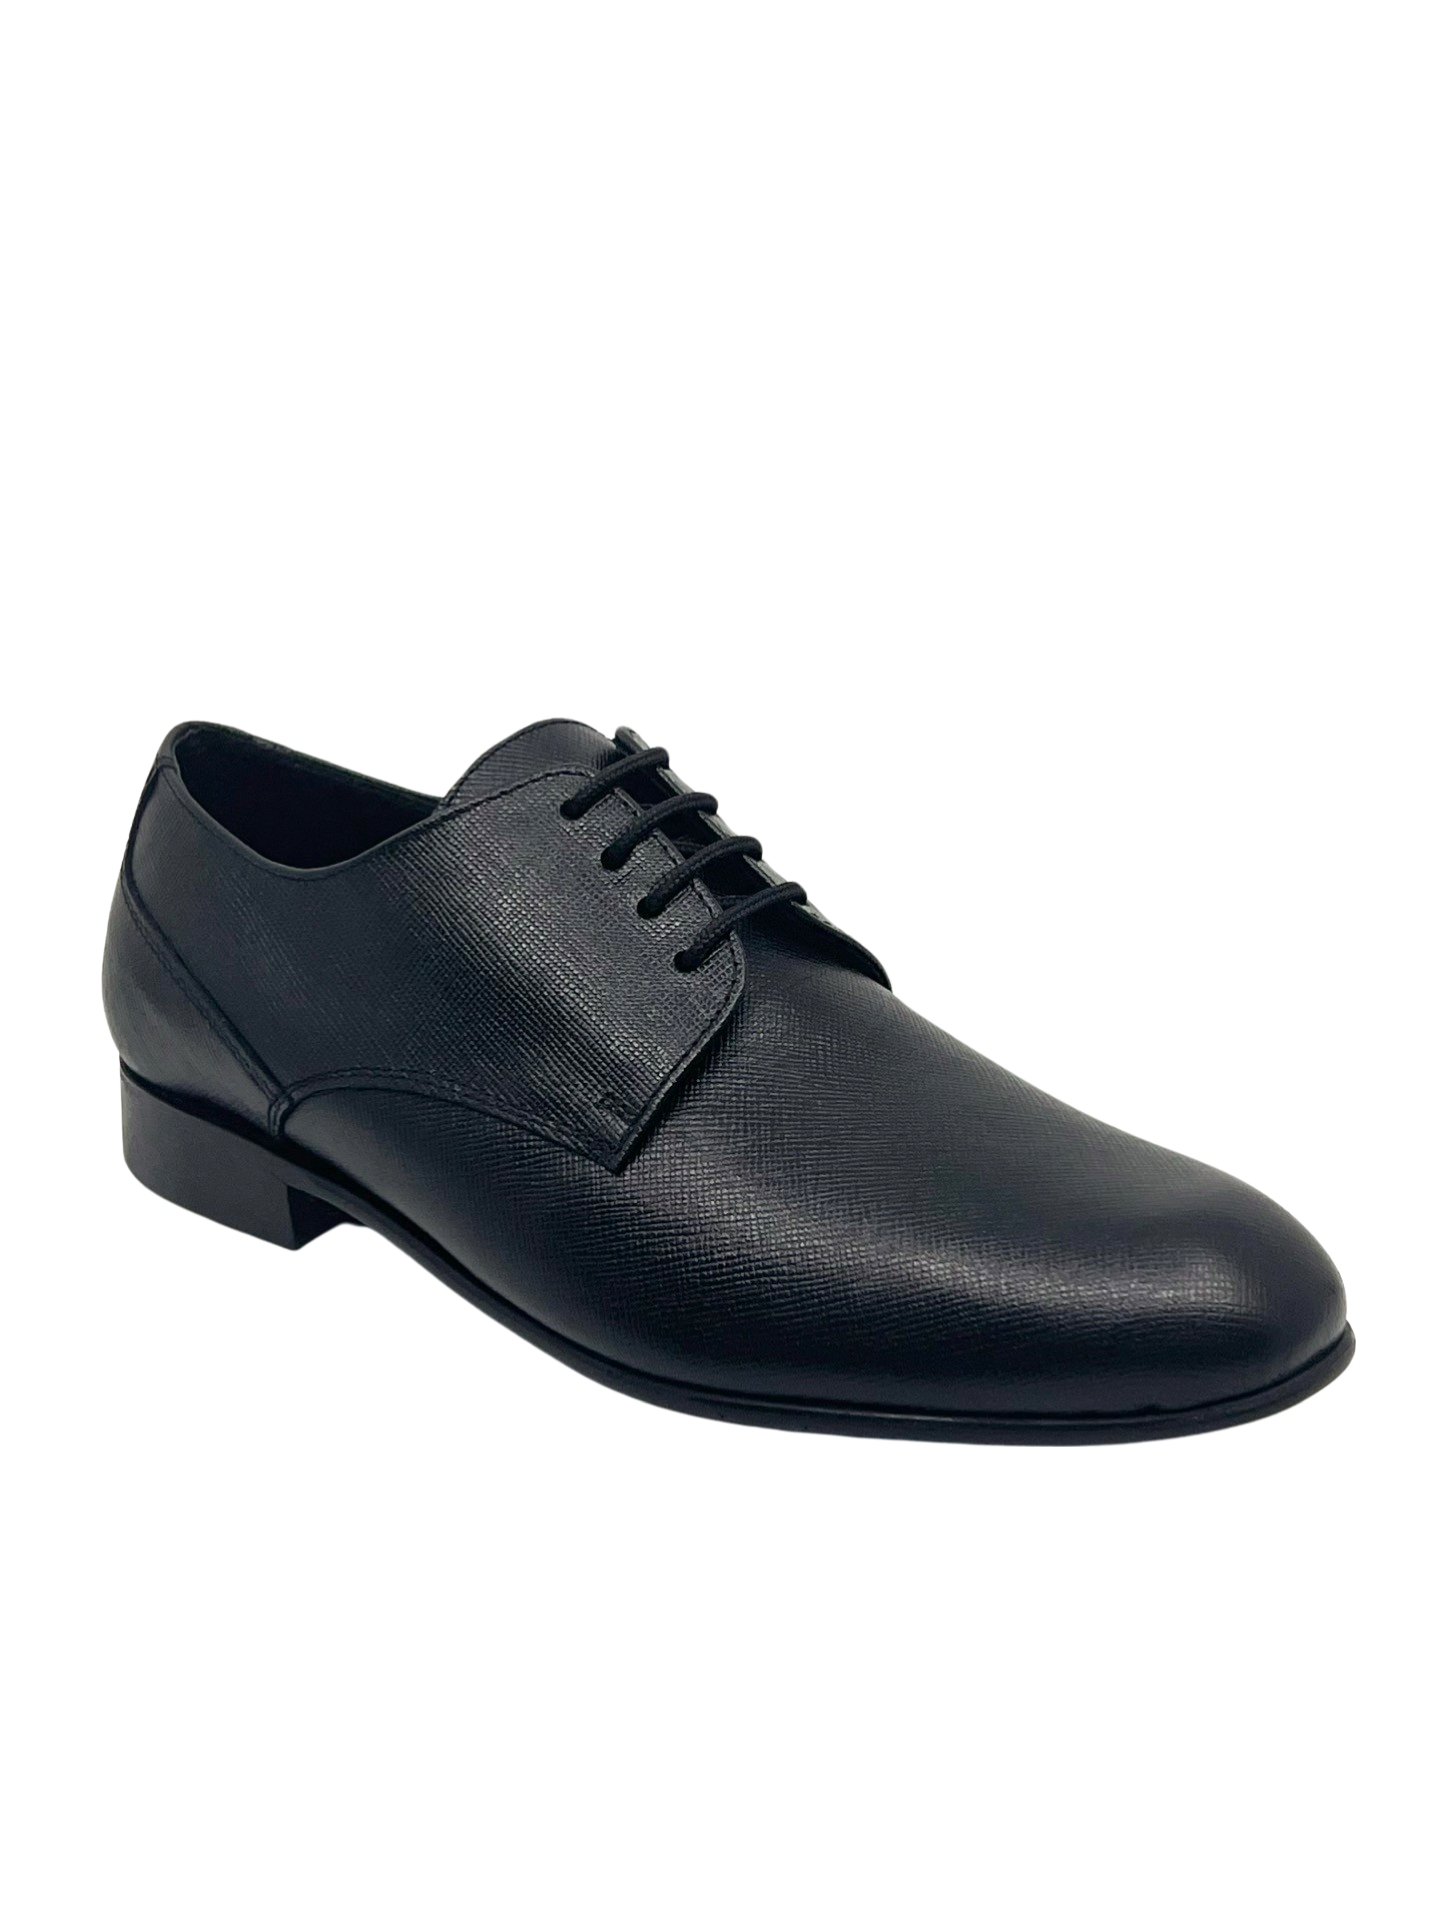 Andanines Black Textured laced Dress Shoe